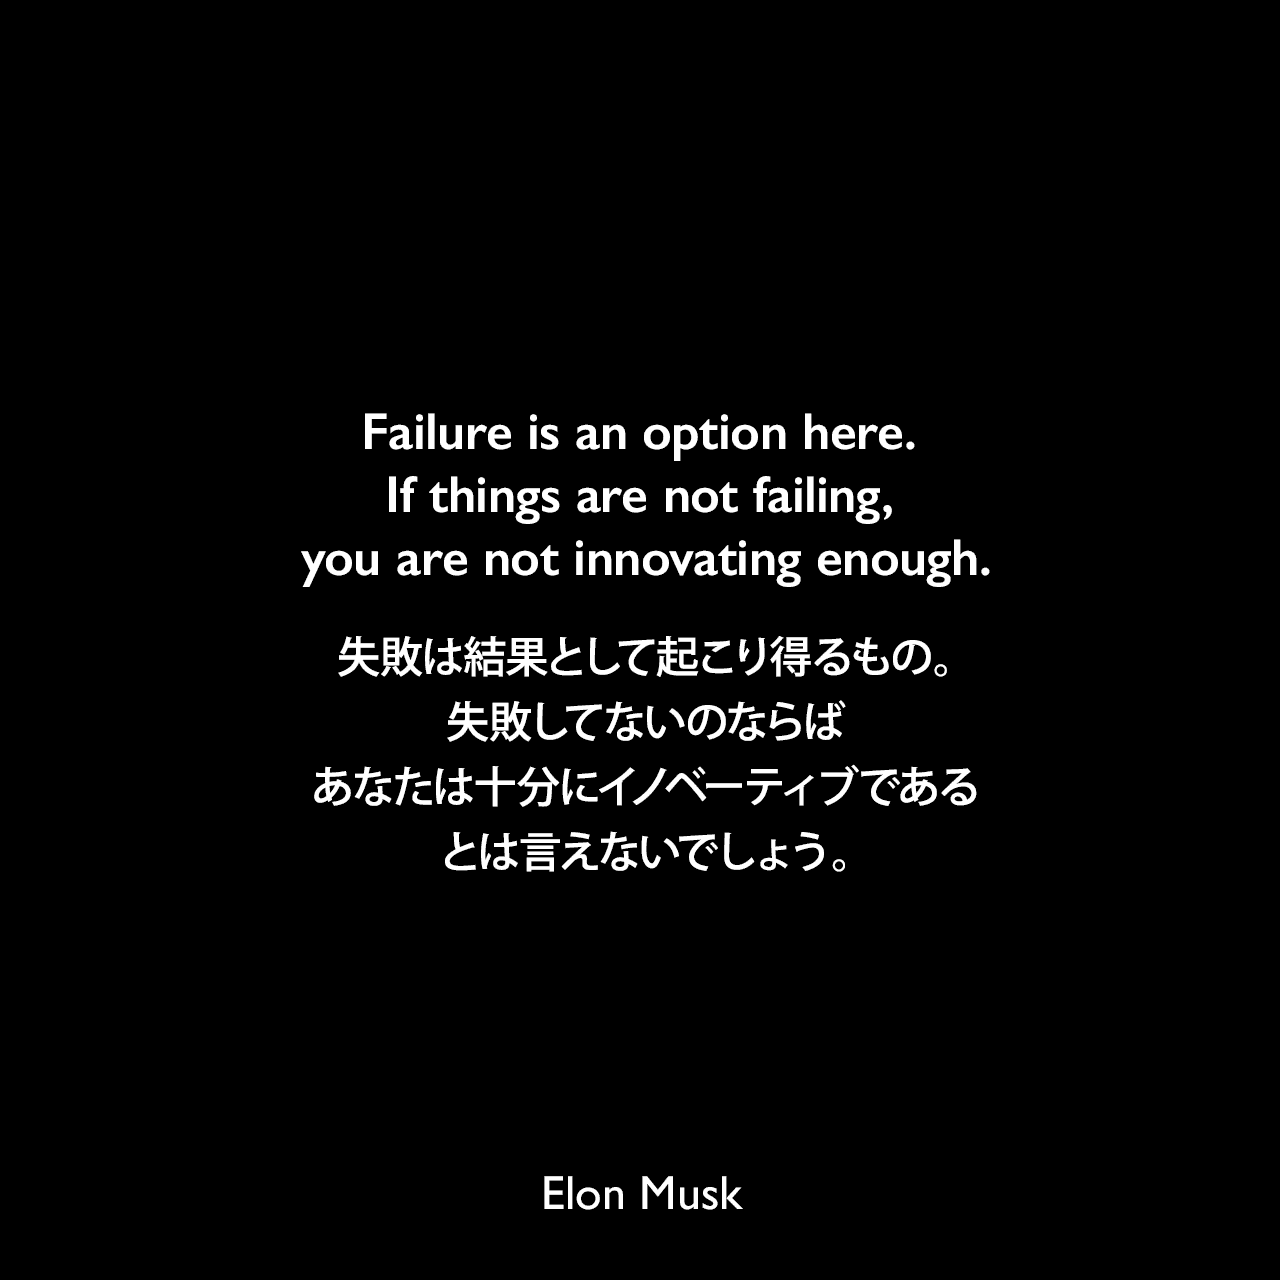 Failure is an option here. If things are not failing, you are not innovating enough.失敗は結果として起こり得るもの。失敗してないのならば、あなたは十分にイノベーティブであるとは言えないでしょう。- 2005年2月 Fast Company「Hondas in Space」より